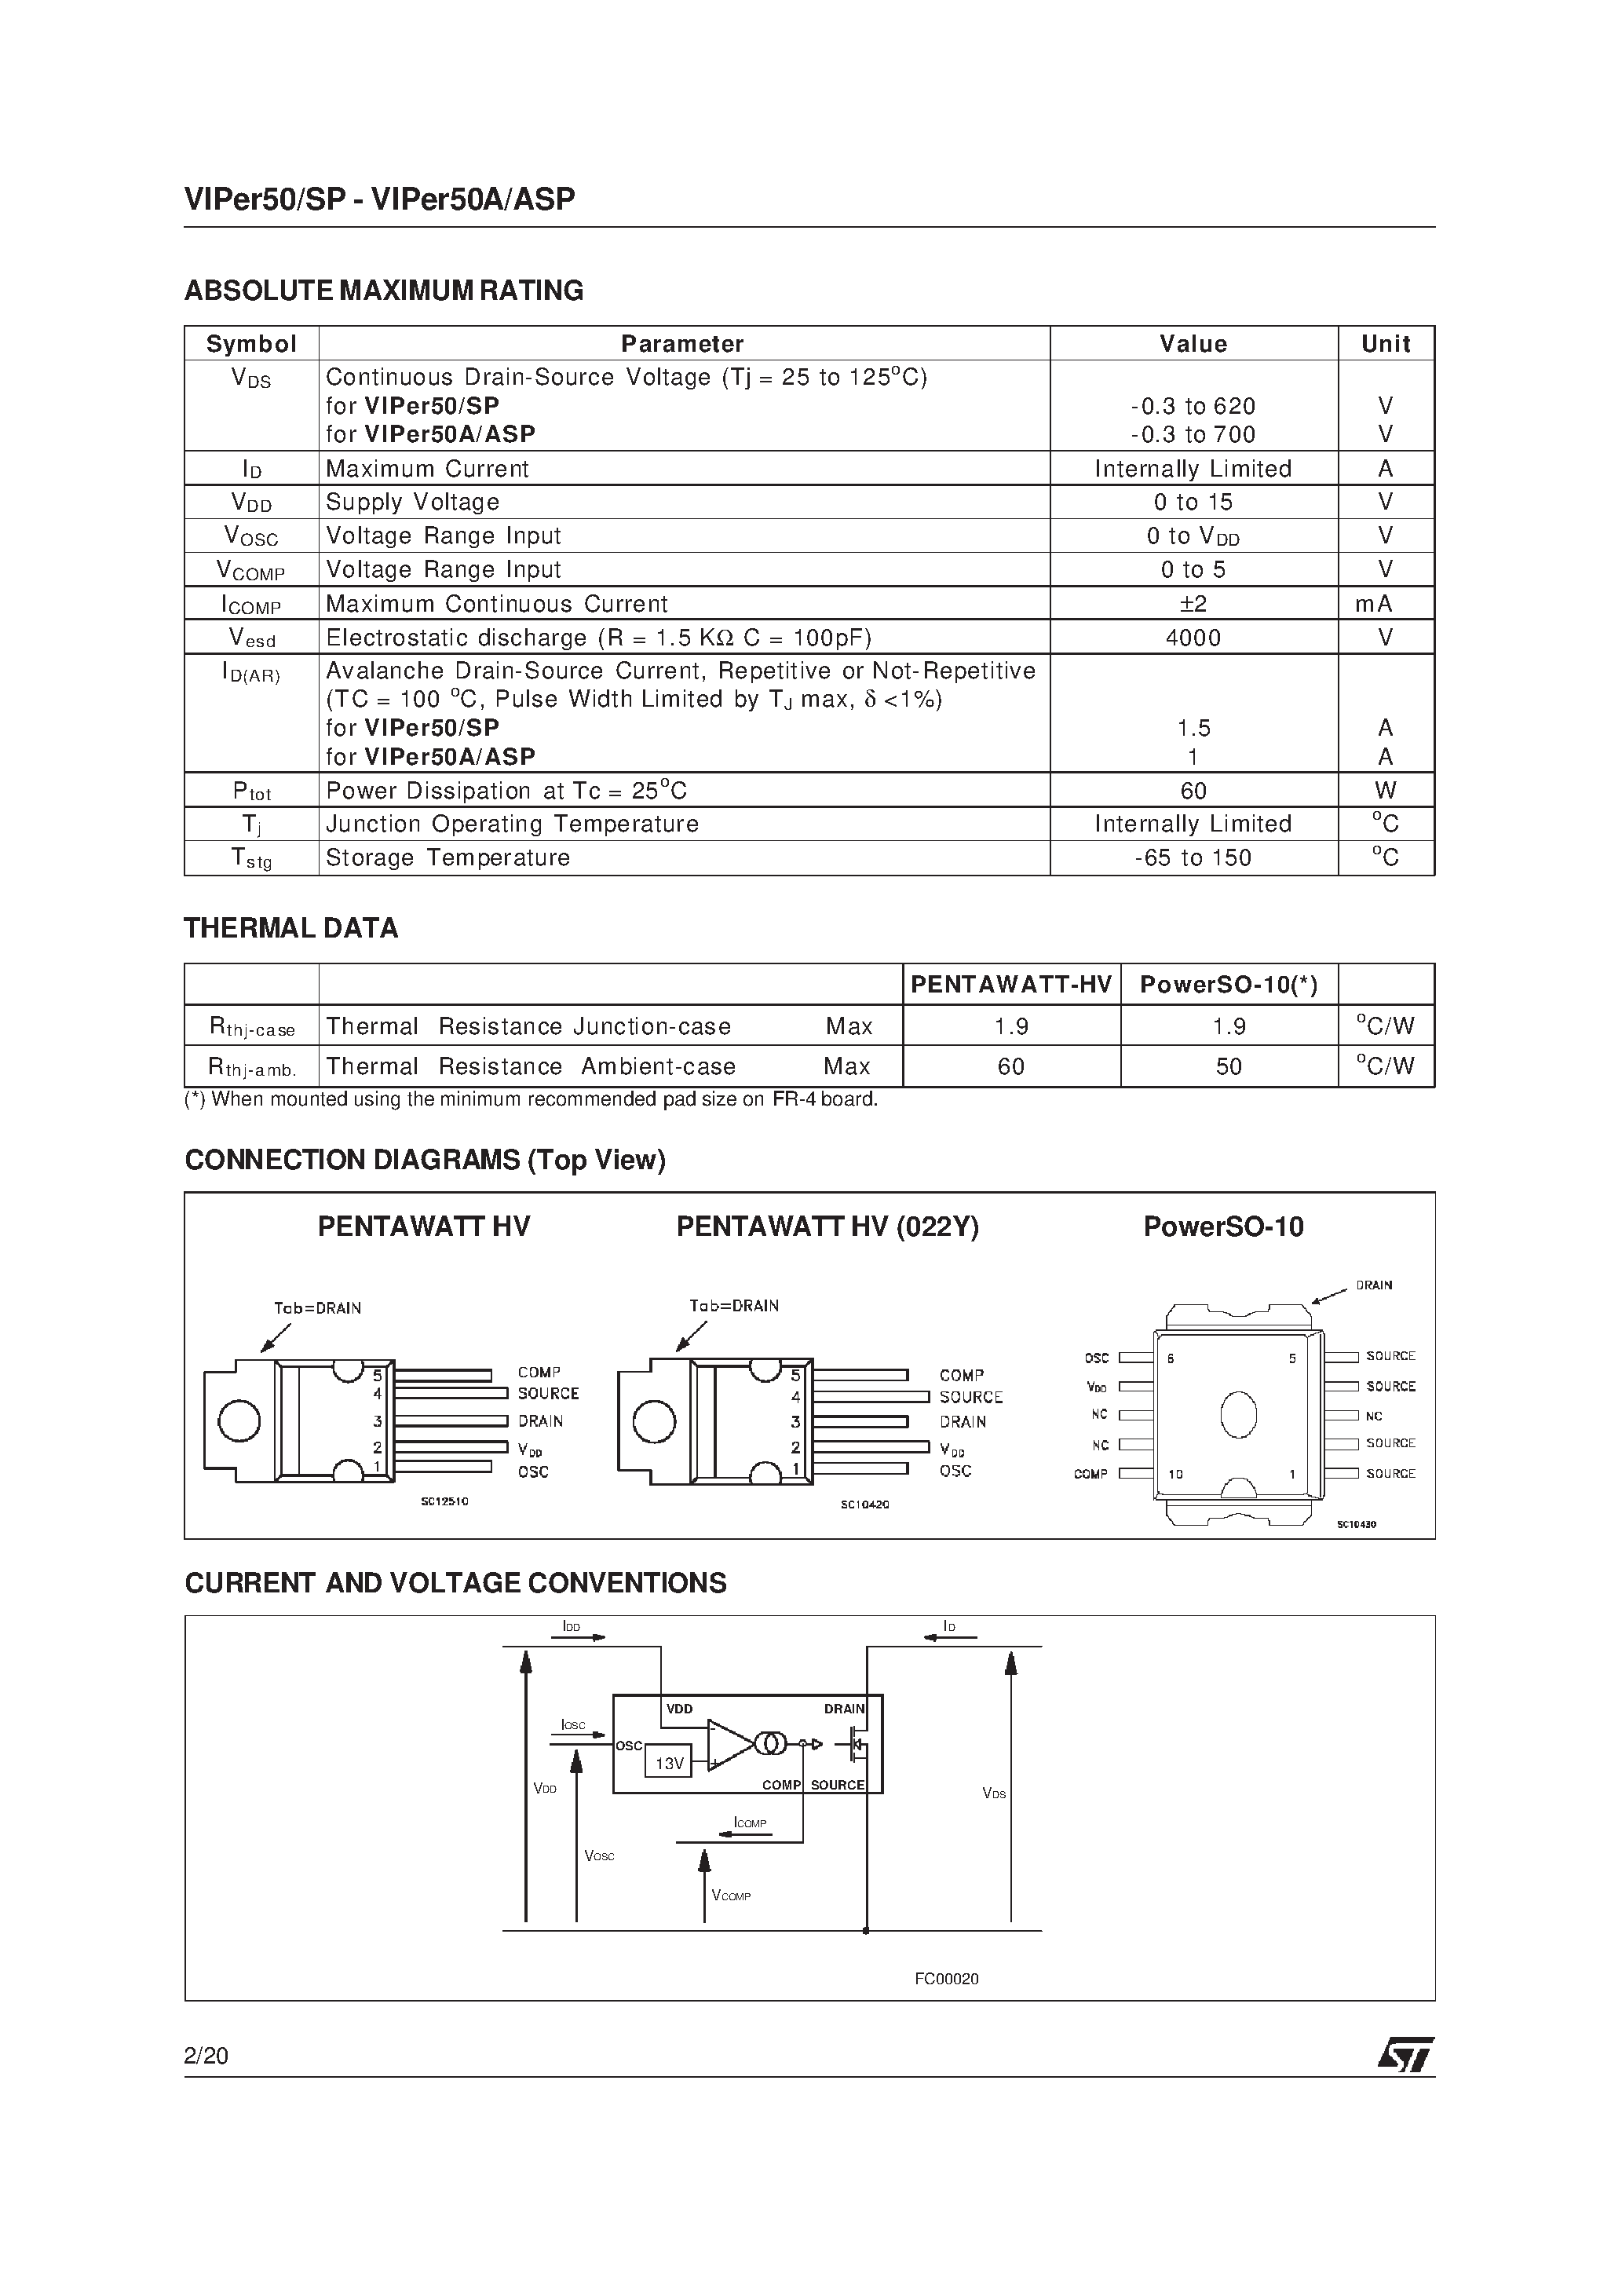 Datasheet VIPer50SP - SMPS PRIMARY I.C. page 2